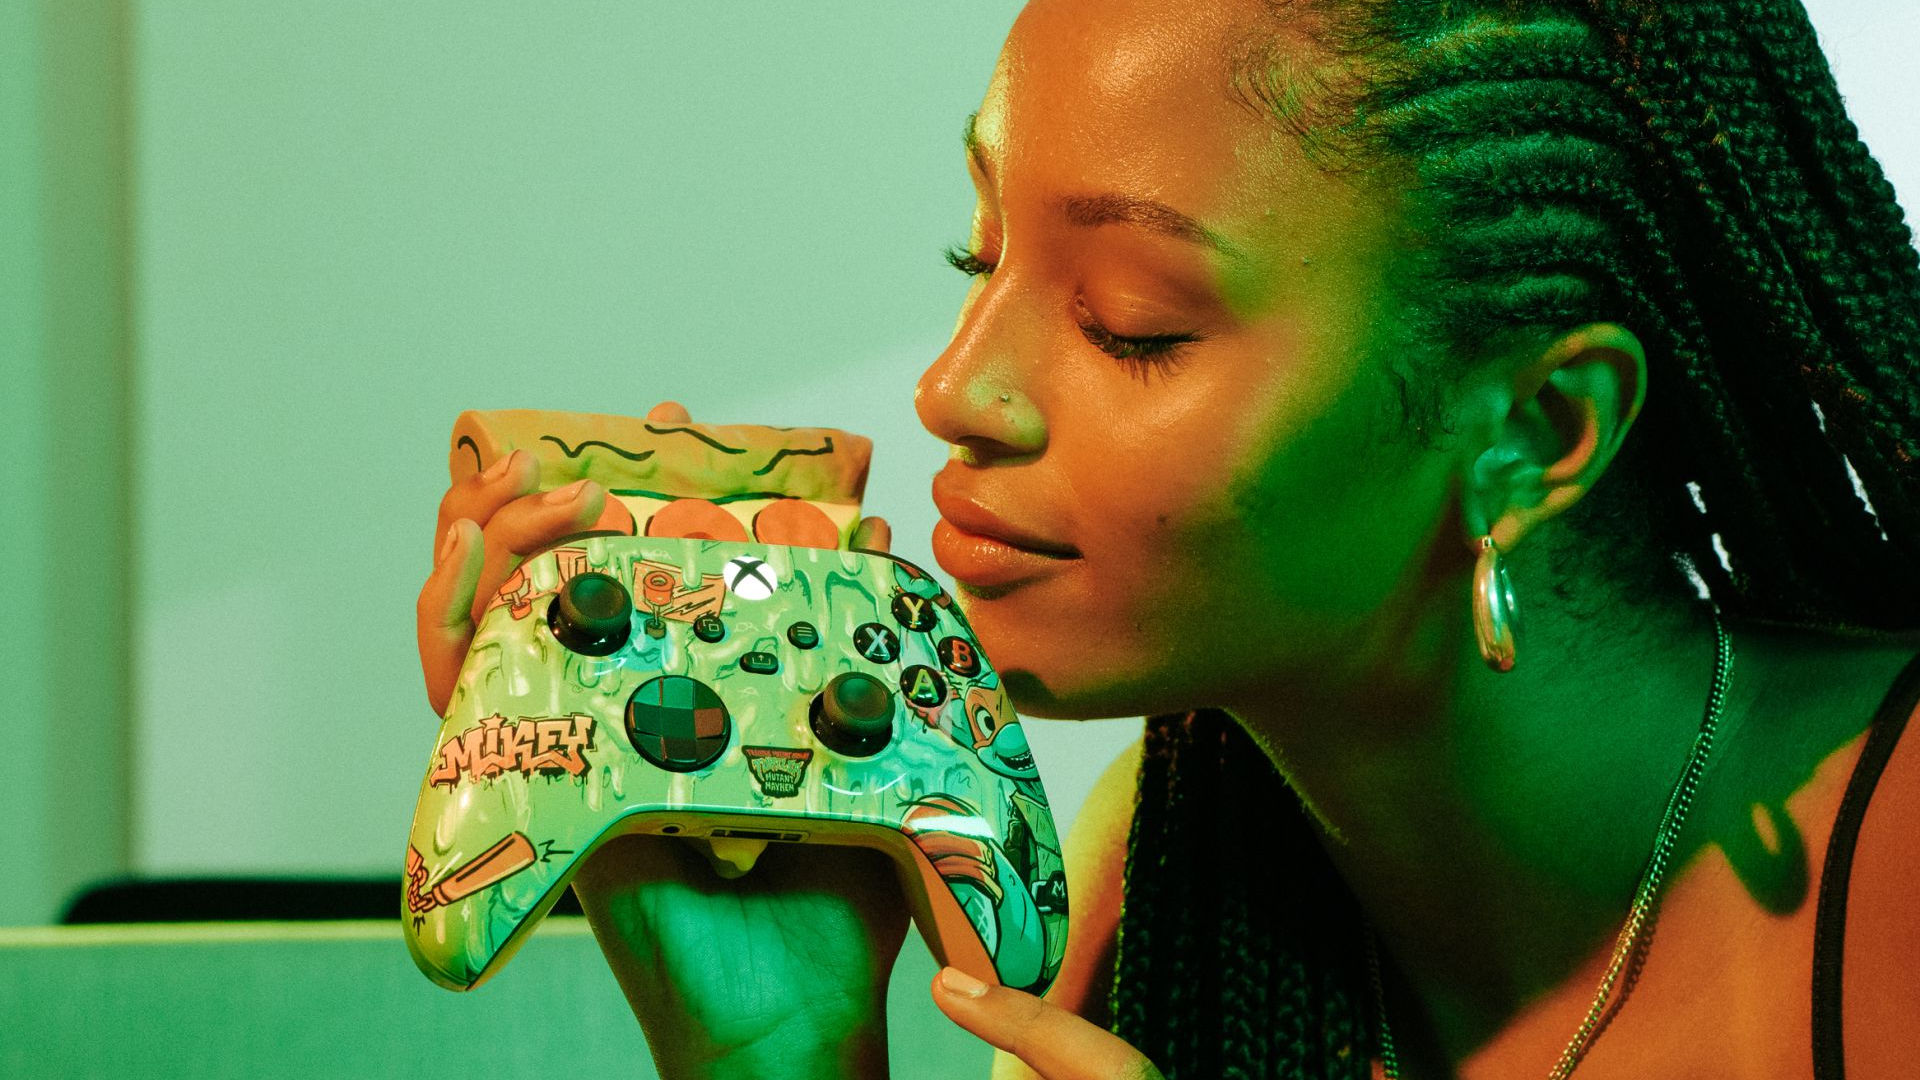 First Ever Pizza-Scented Xbox and TMNT: Mutant Mayhem Controller - Xbox Wire